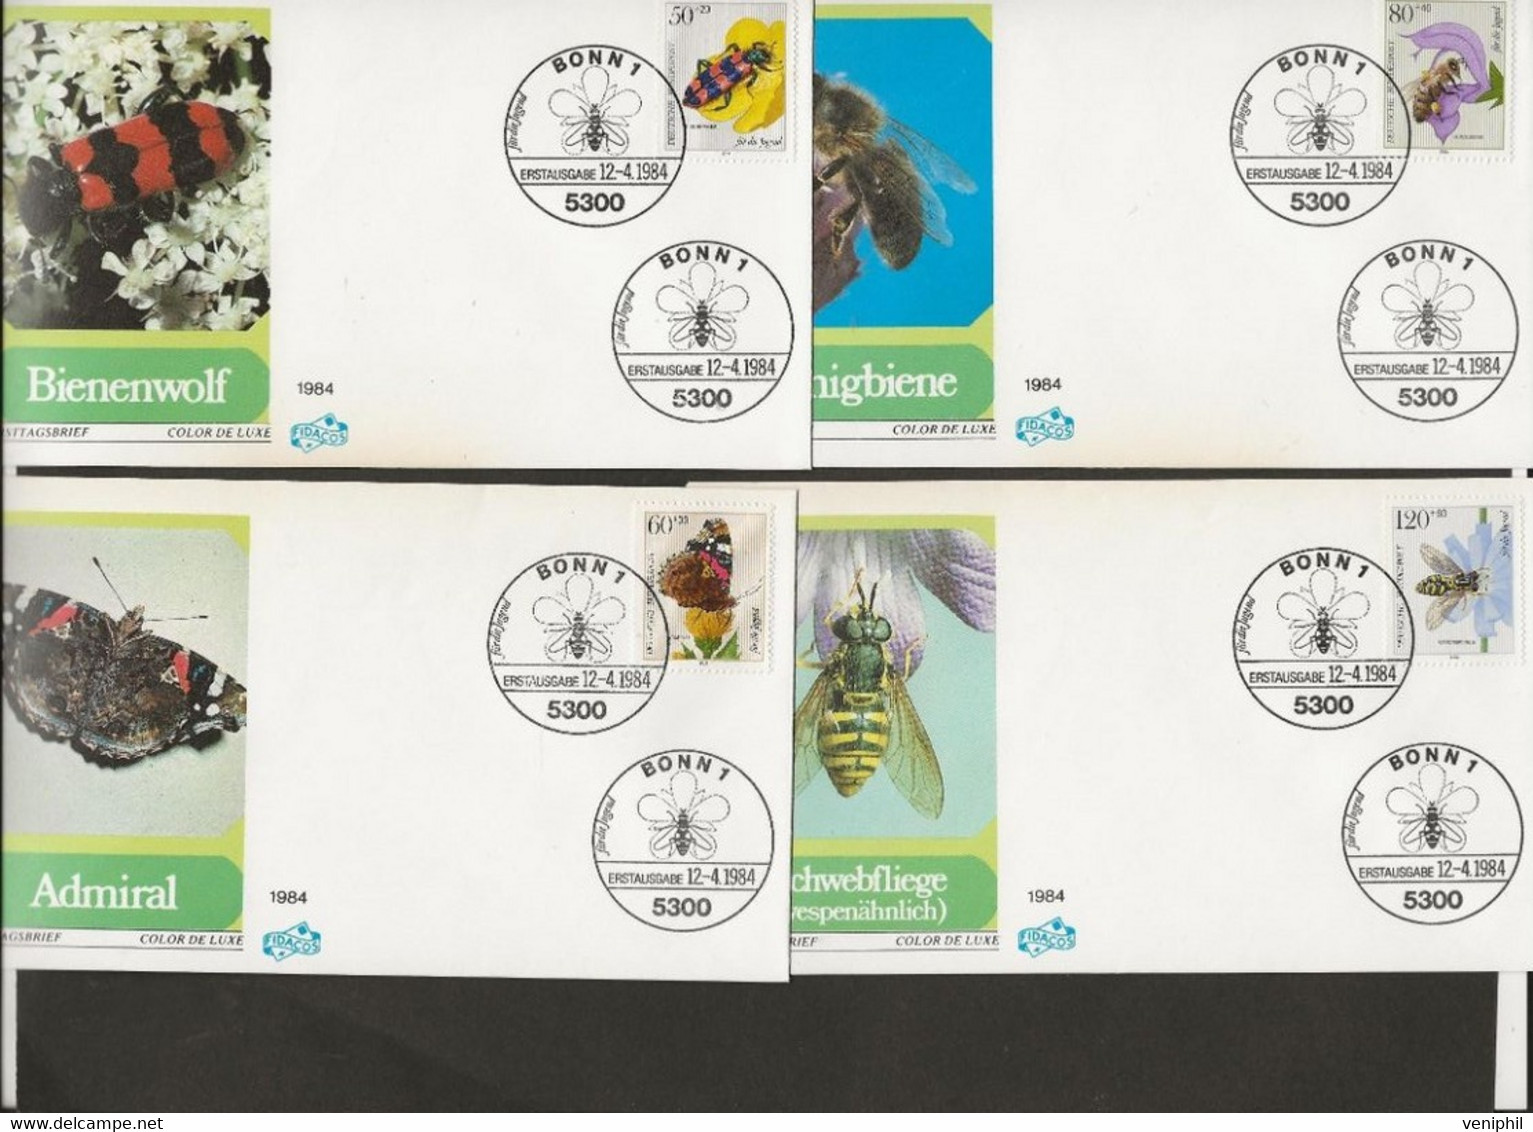 ALLEMAGNE - SERIE INSECTES N° 1034 A 1037 SUR 4 LETTRES FDC - ANNEE 1984 - Api